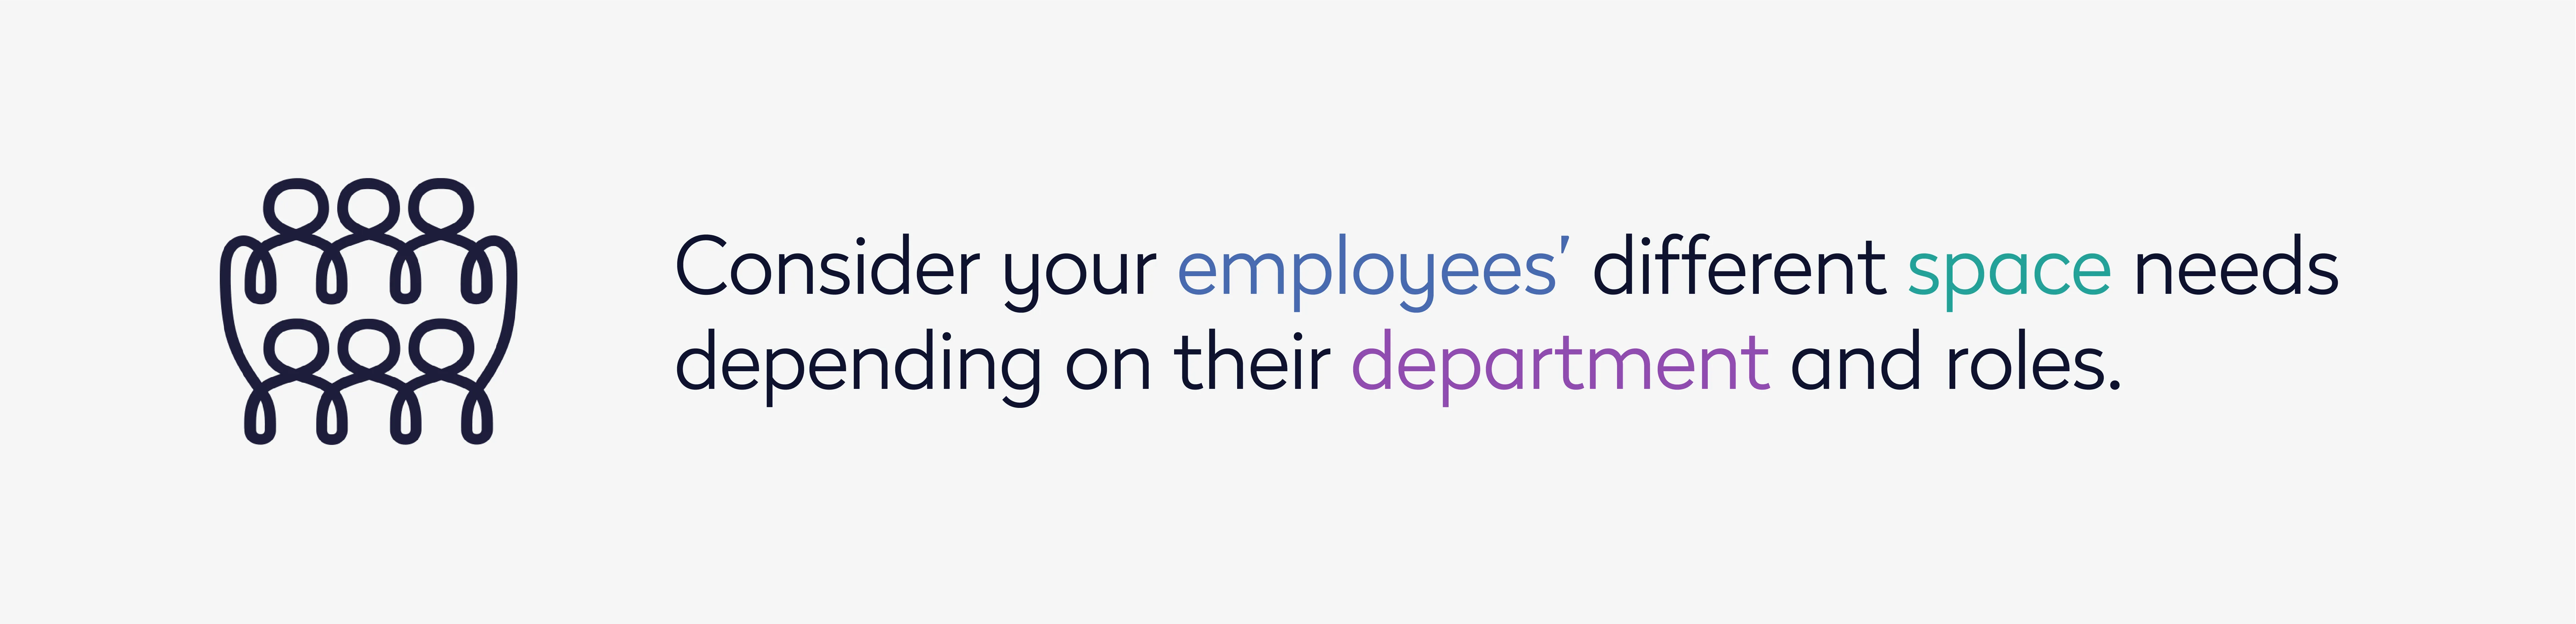 Consider your employees different space needs depending on their department and roles.